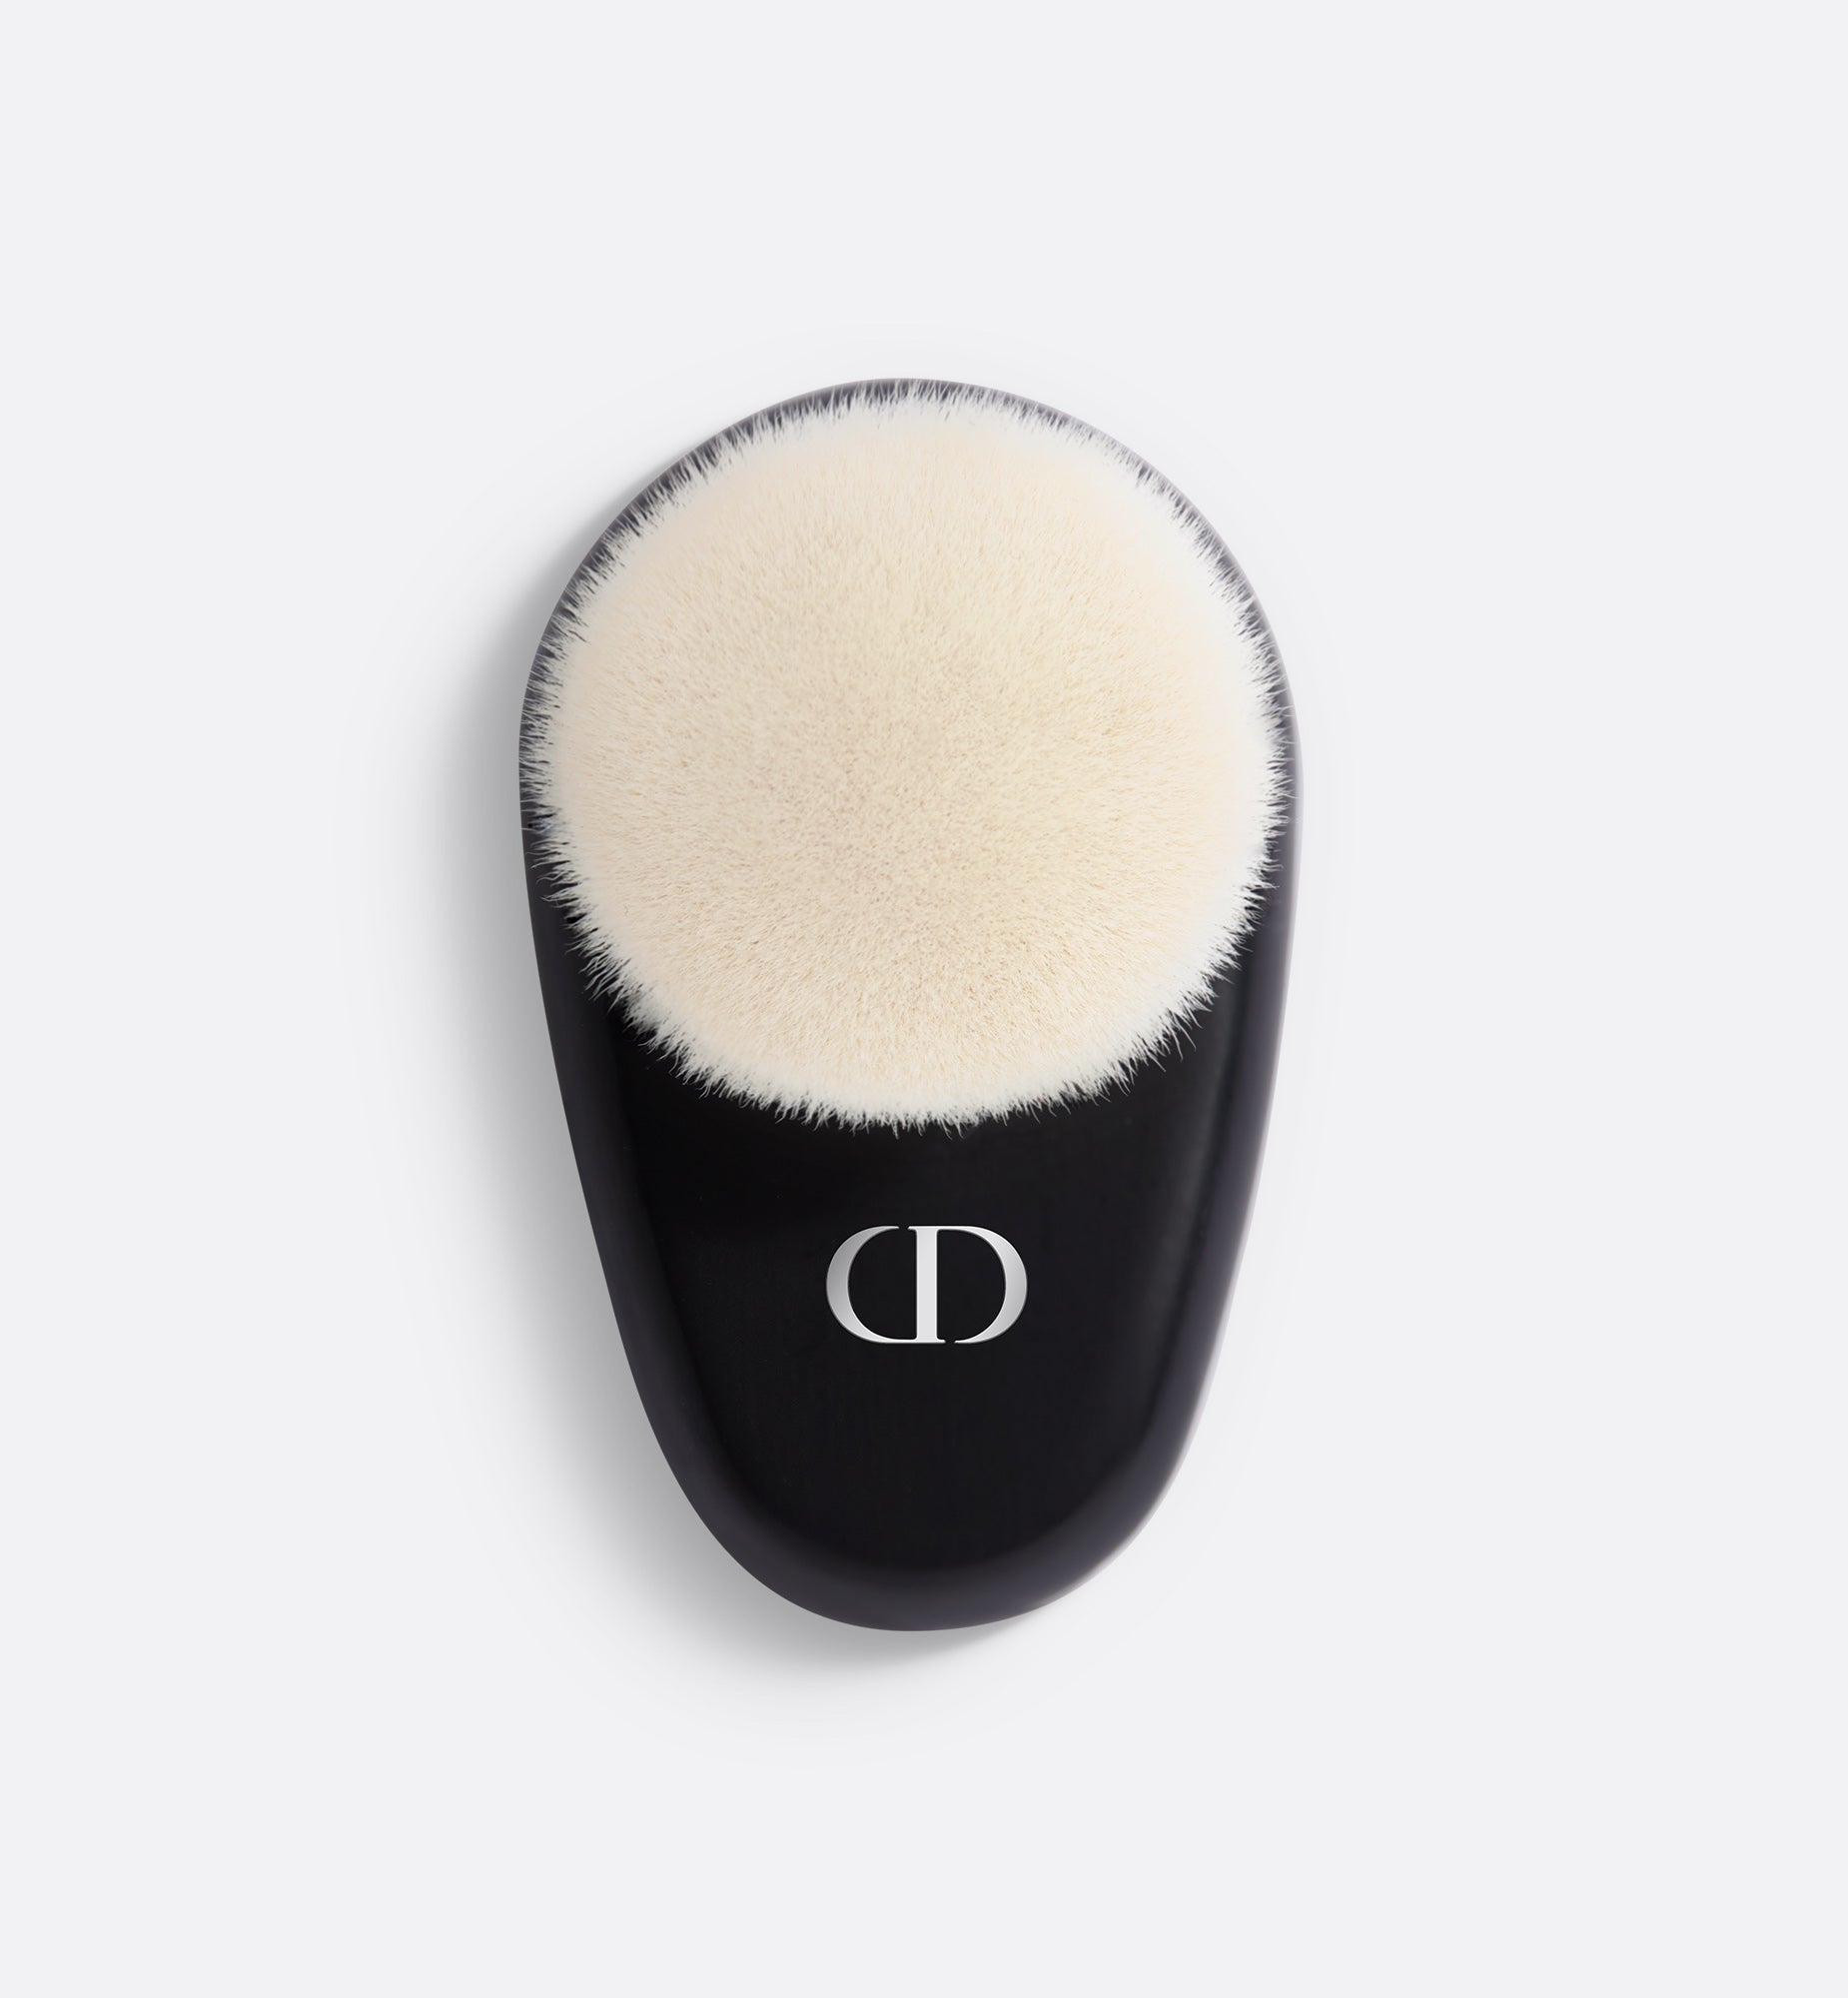 Dior Backstage Face Brush N°18 | For Even and Luminous Finish with Buildable Coverage